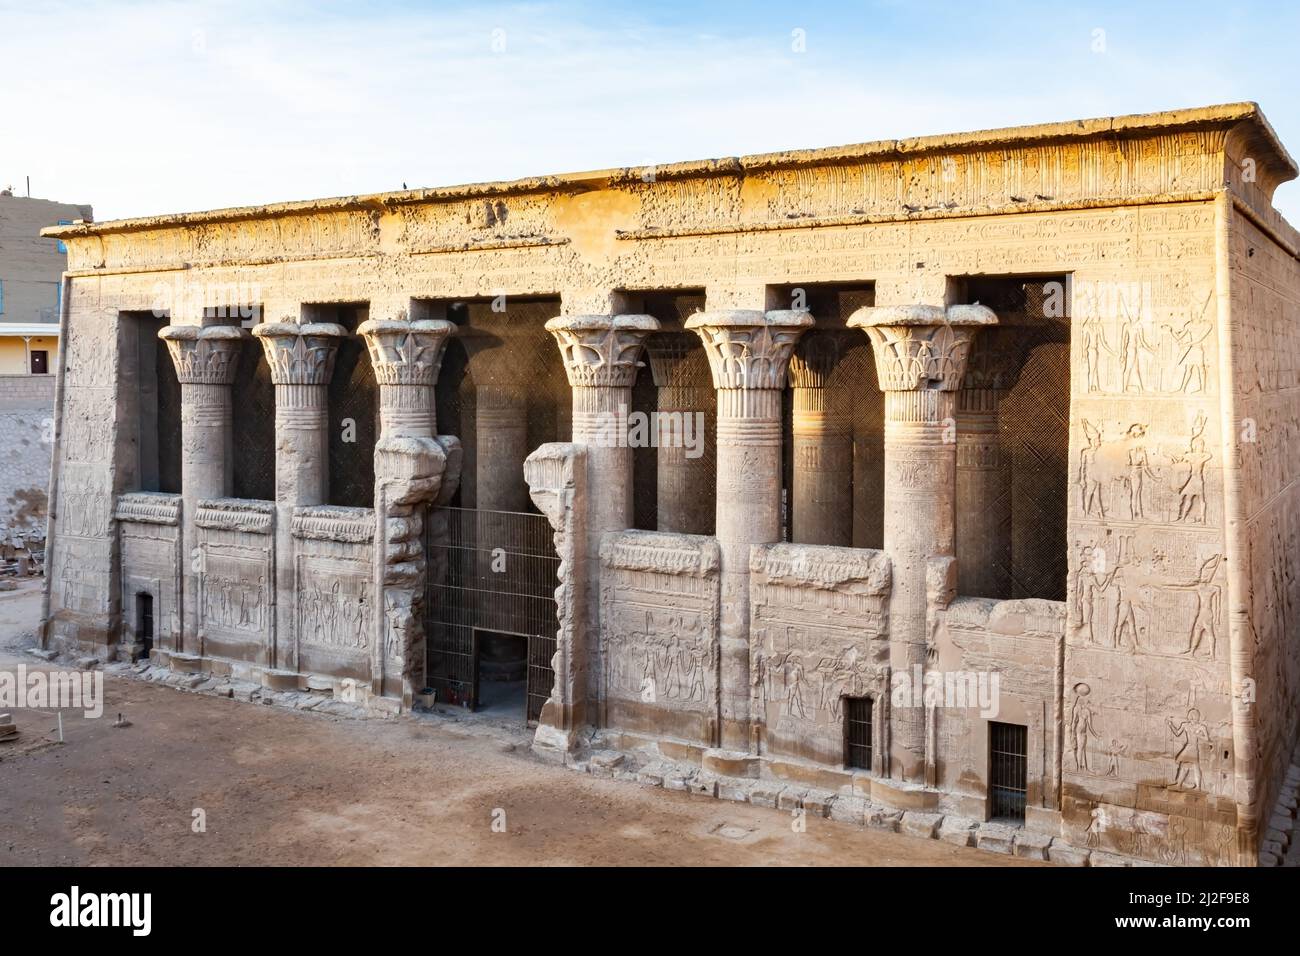 View of The Temple of Khnum, The Ram headed egyptian god, in Esna, Upper Egypt. Stock Photo